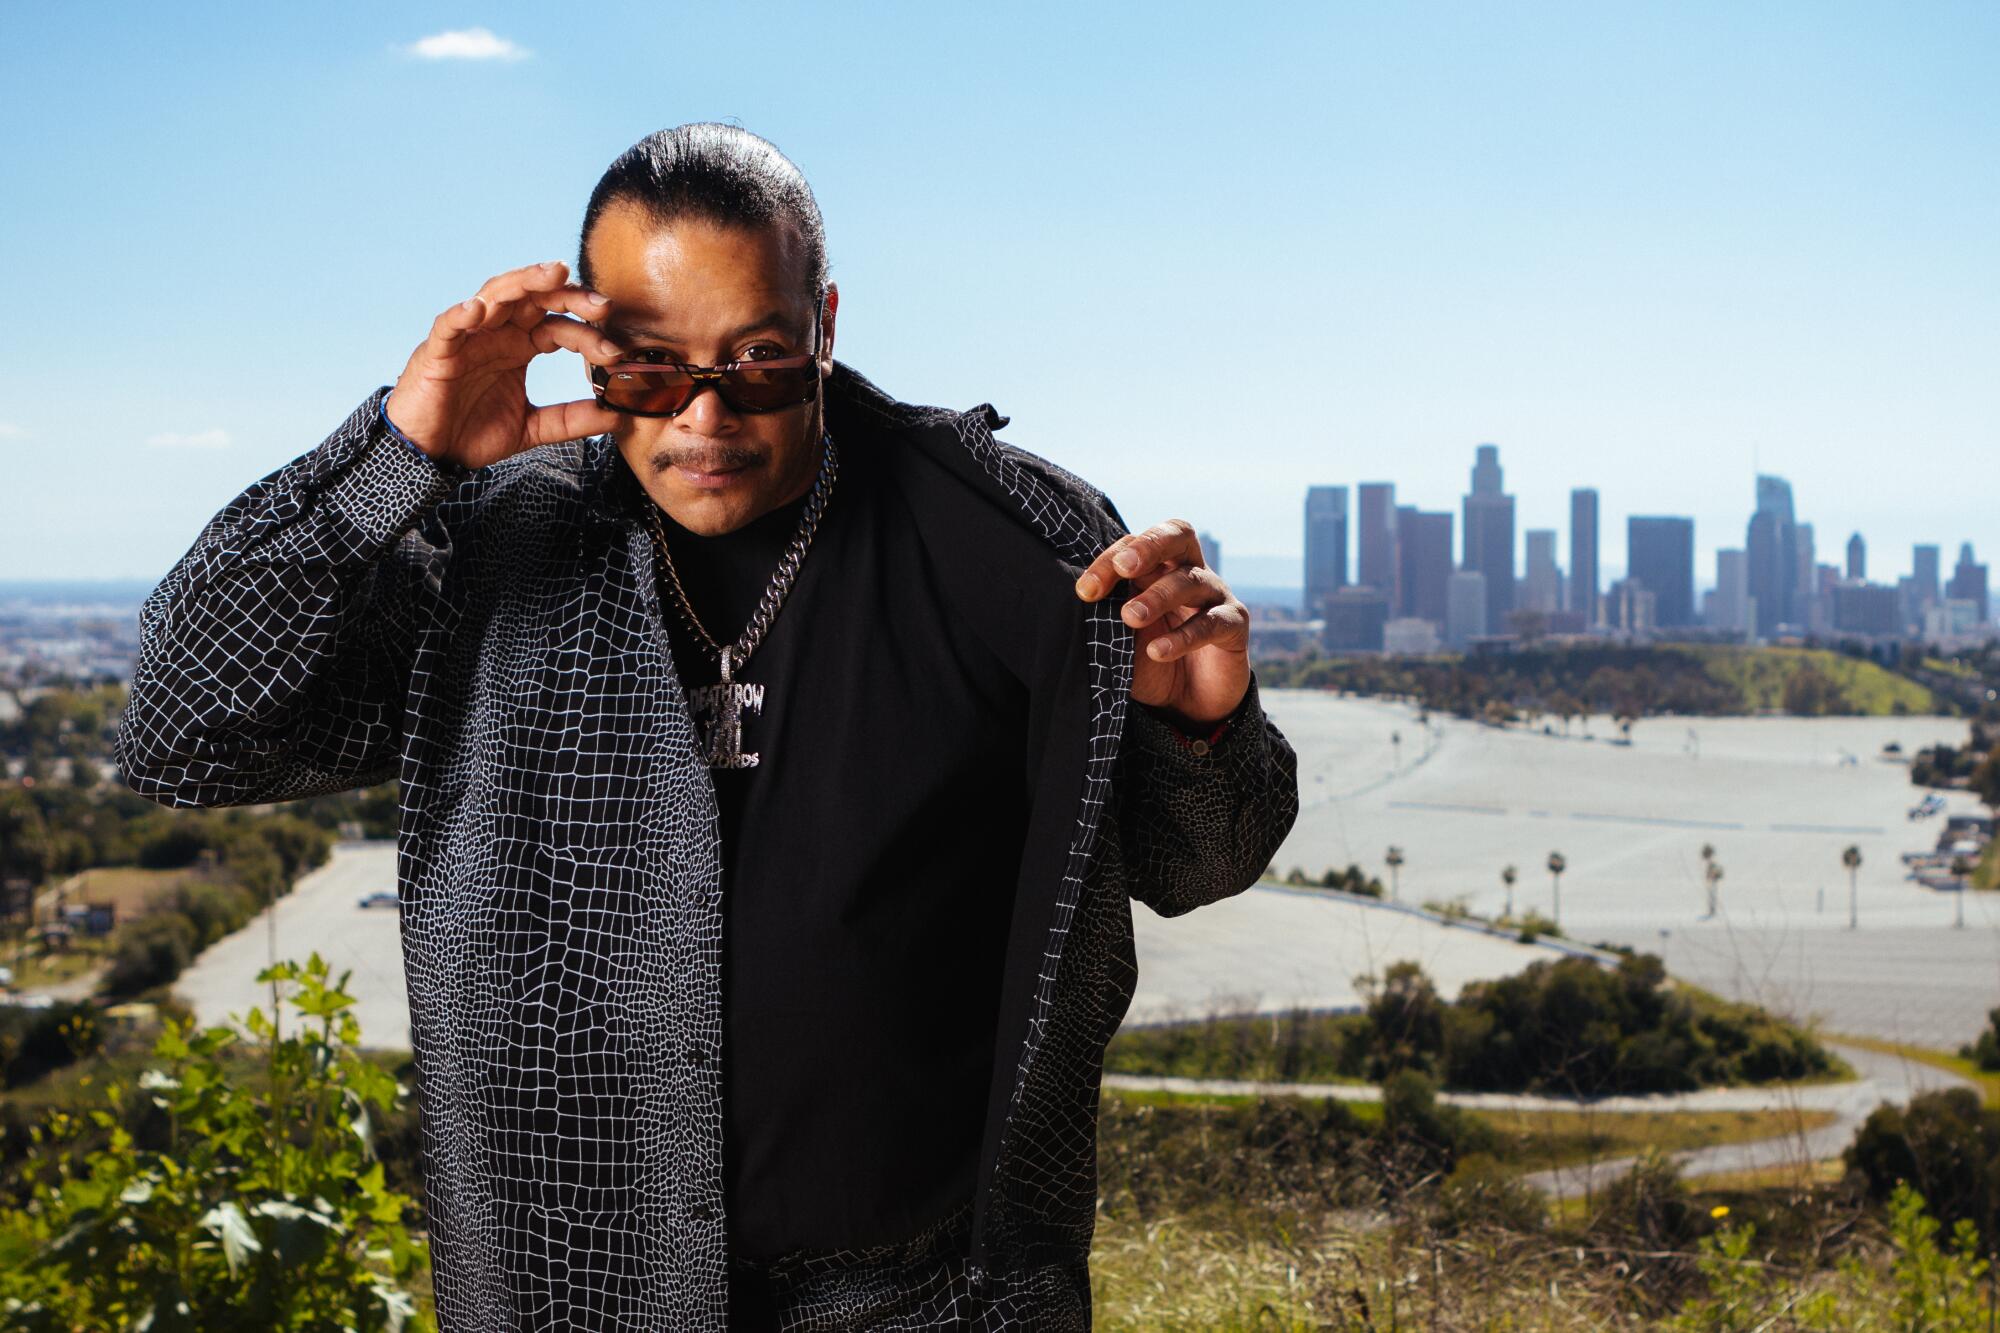 Suga Free photographed in front of downtown L.A.